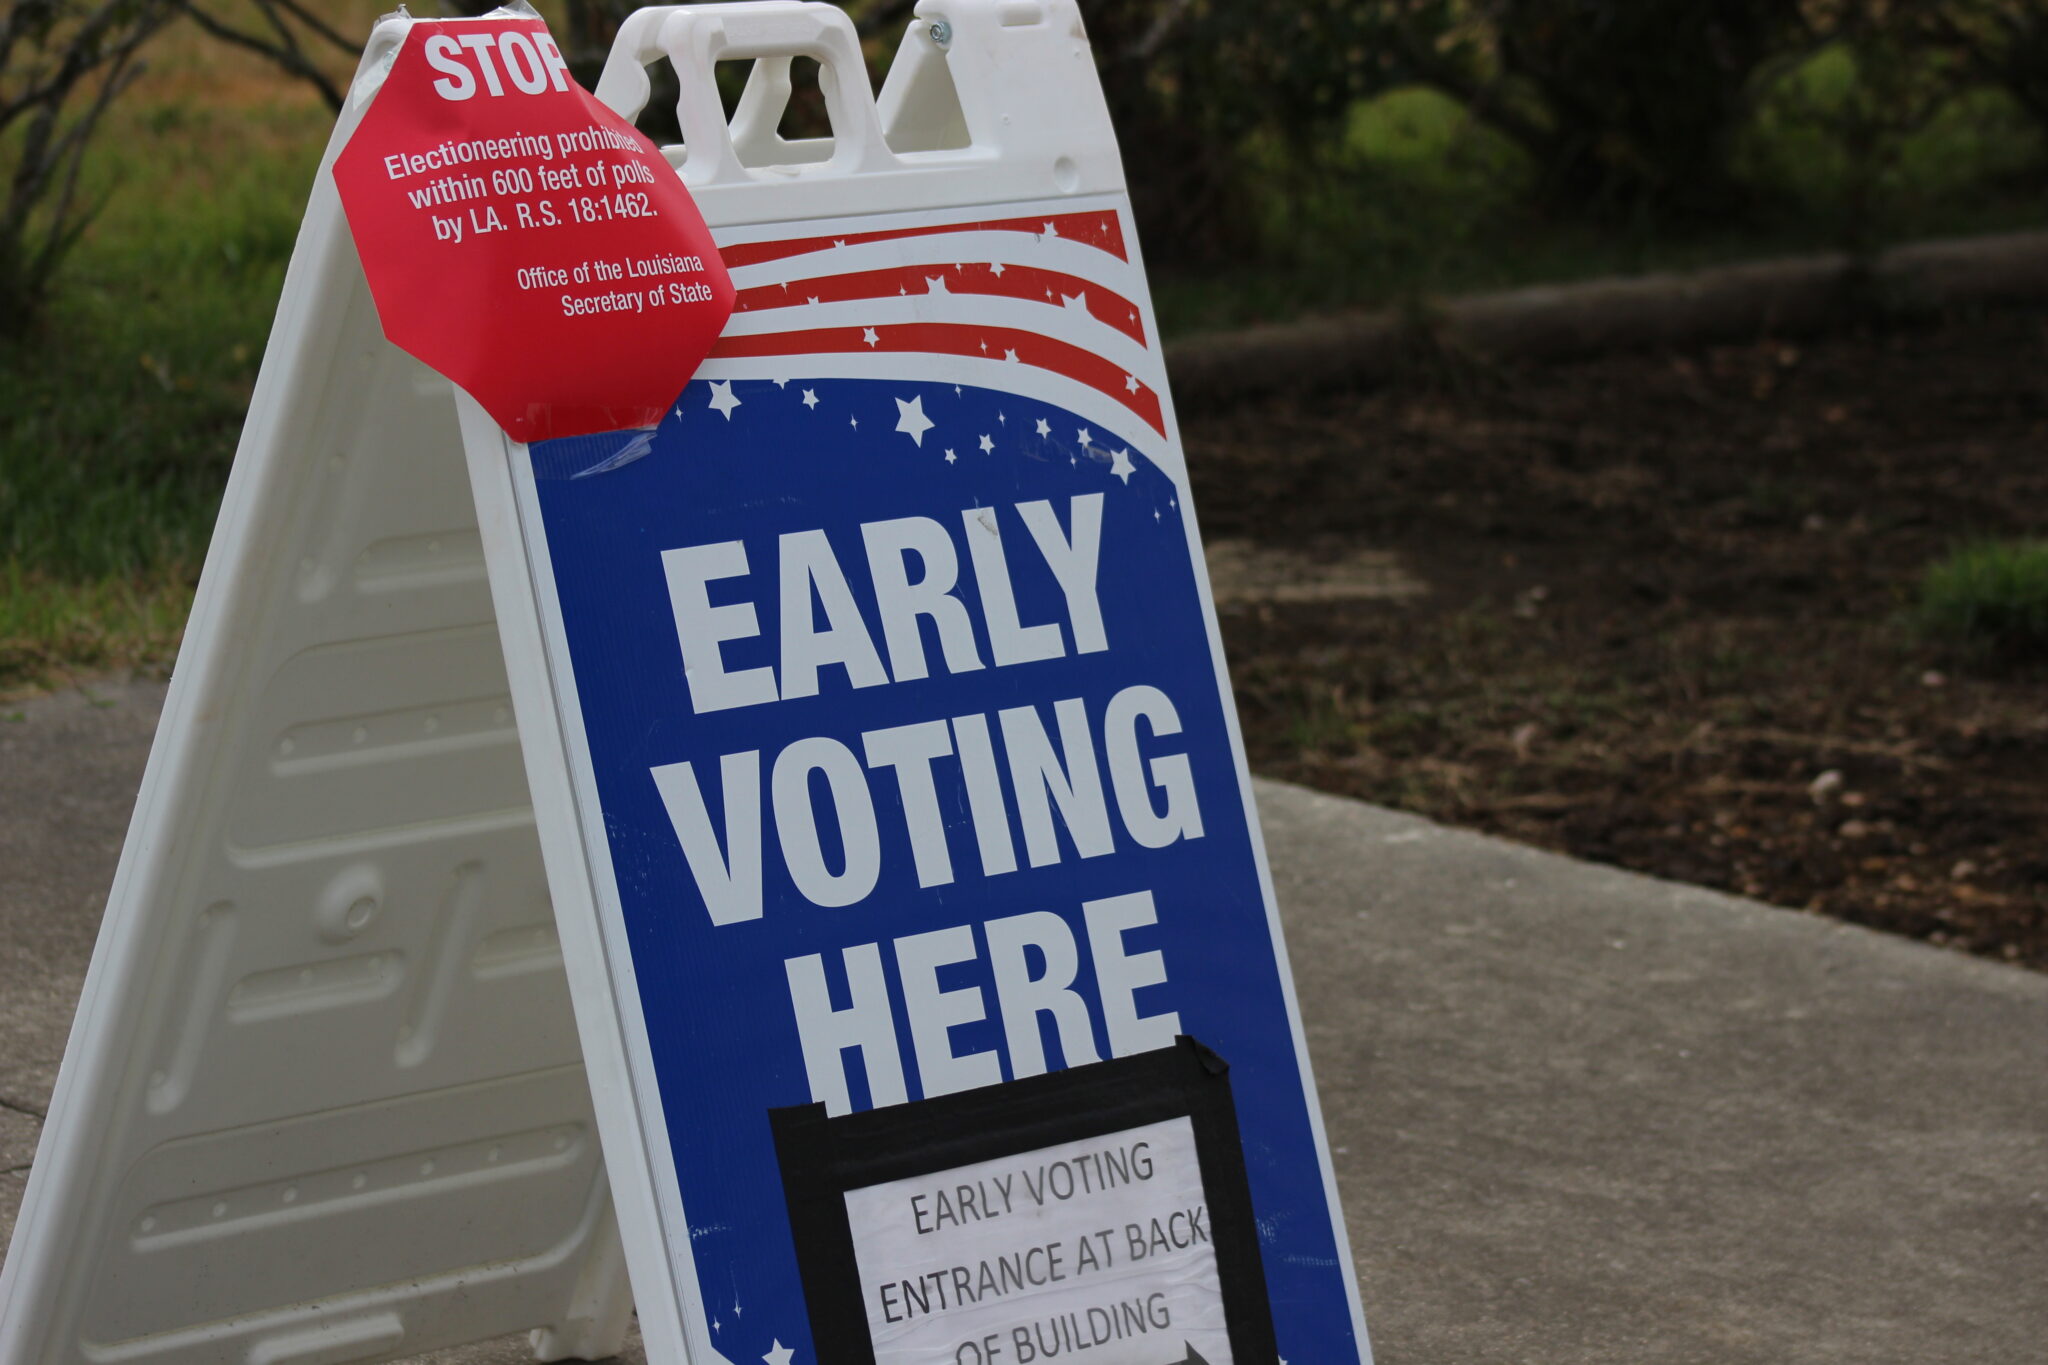 Additional early voting locations rejected in La. House committee